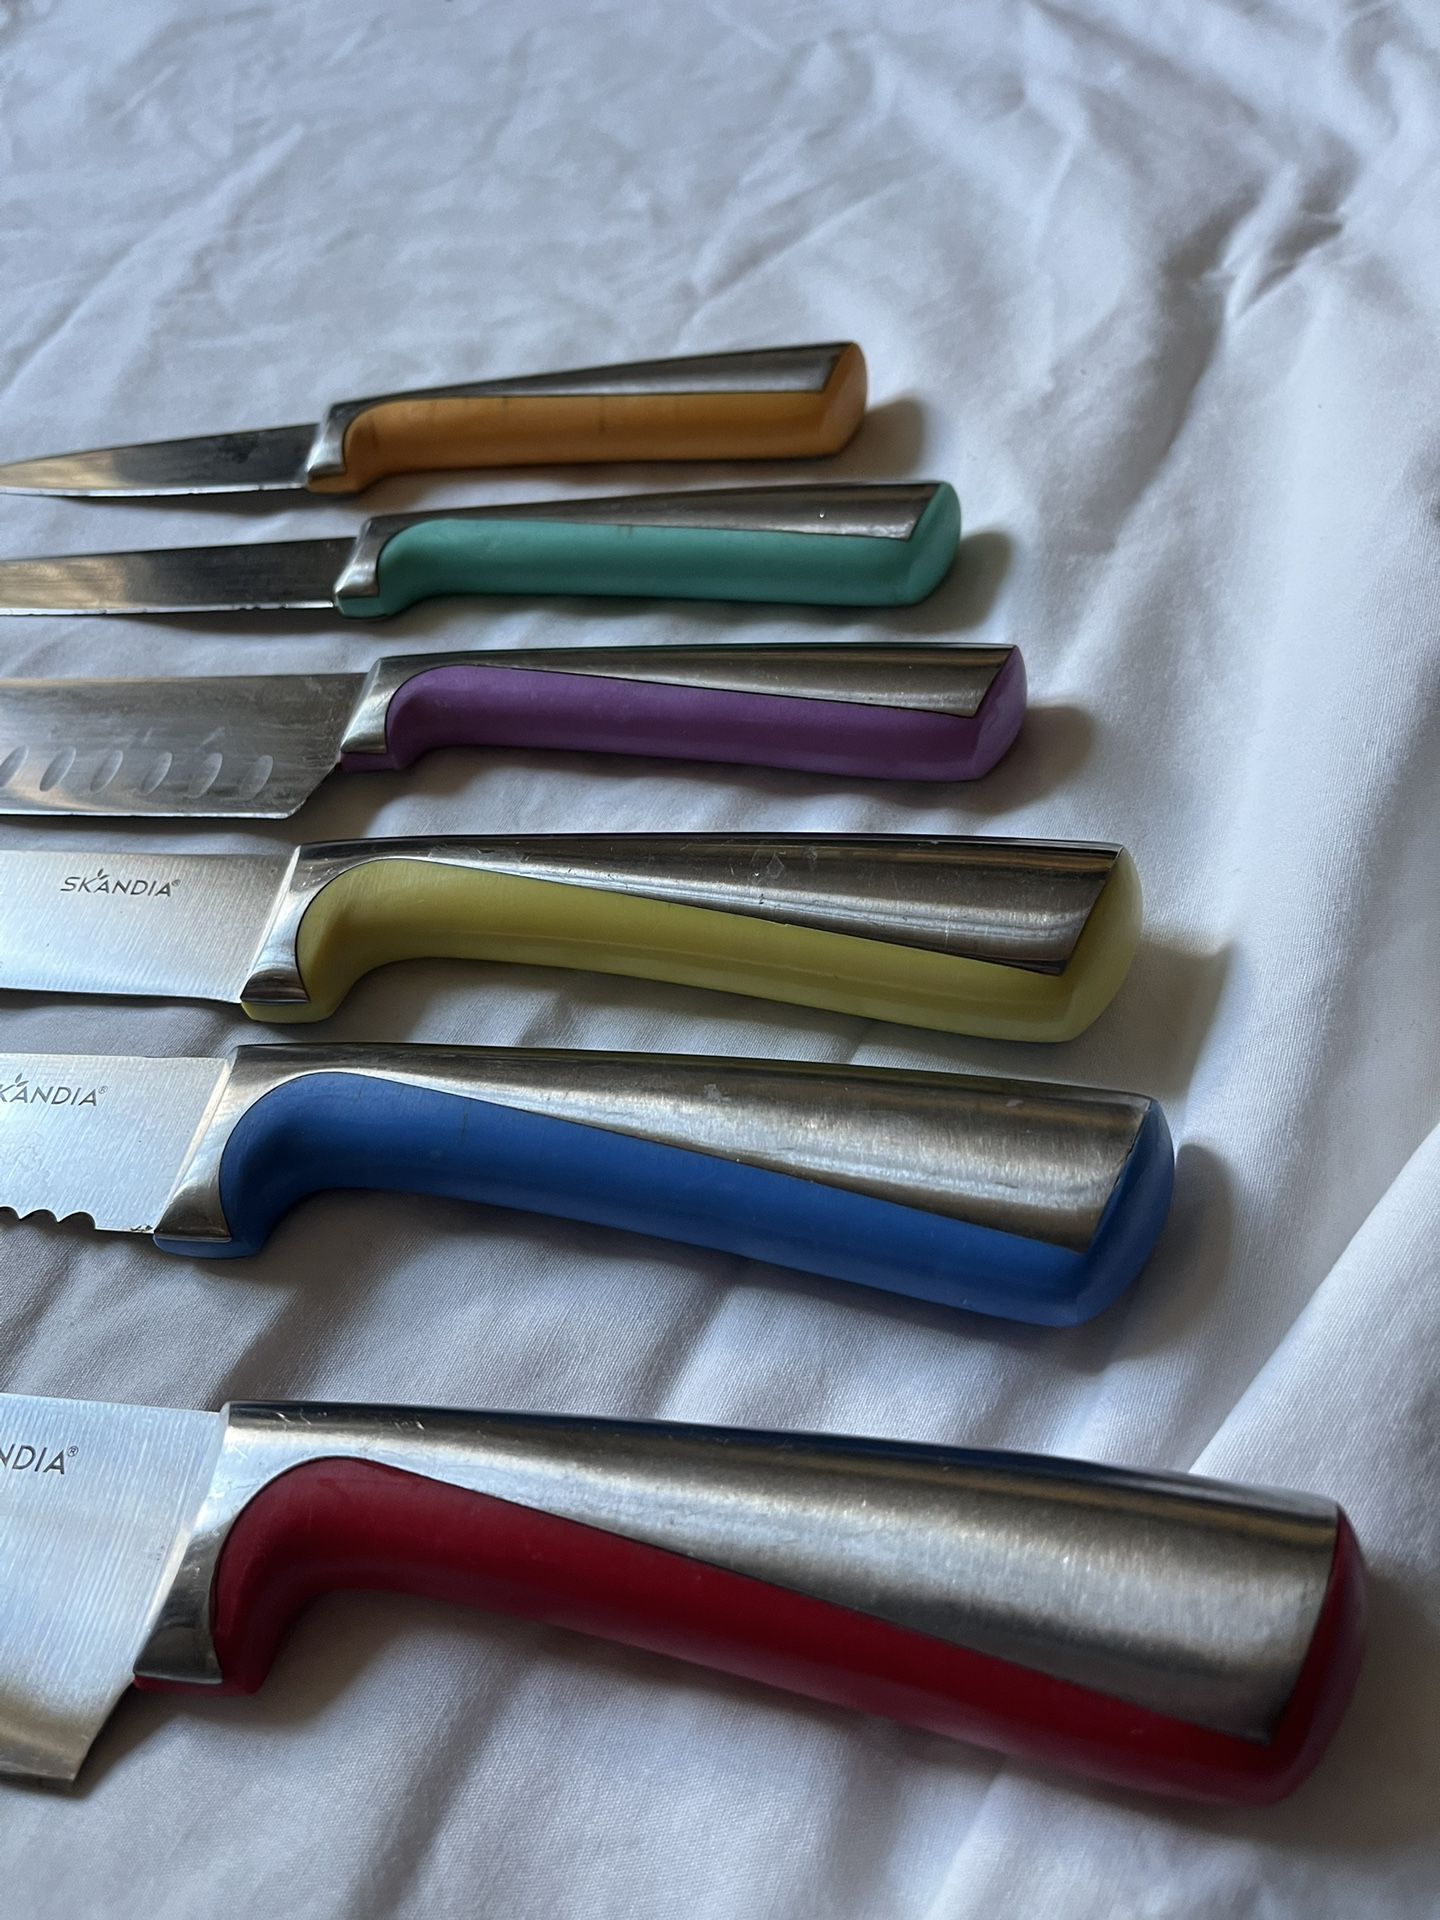 Cooking Knives Henkel Set for Sale in City Of Industry, CA - OfferUp